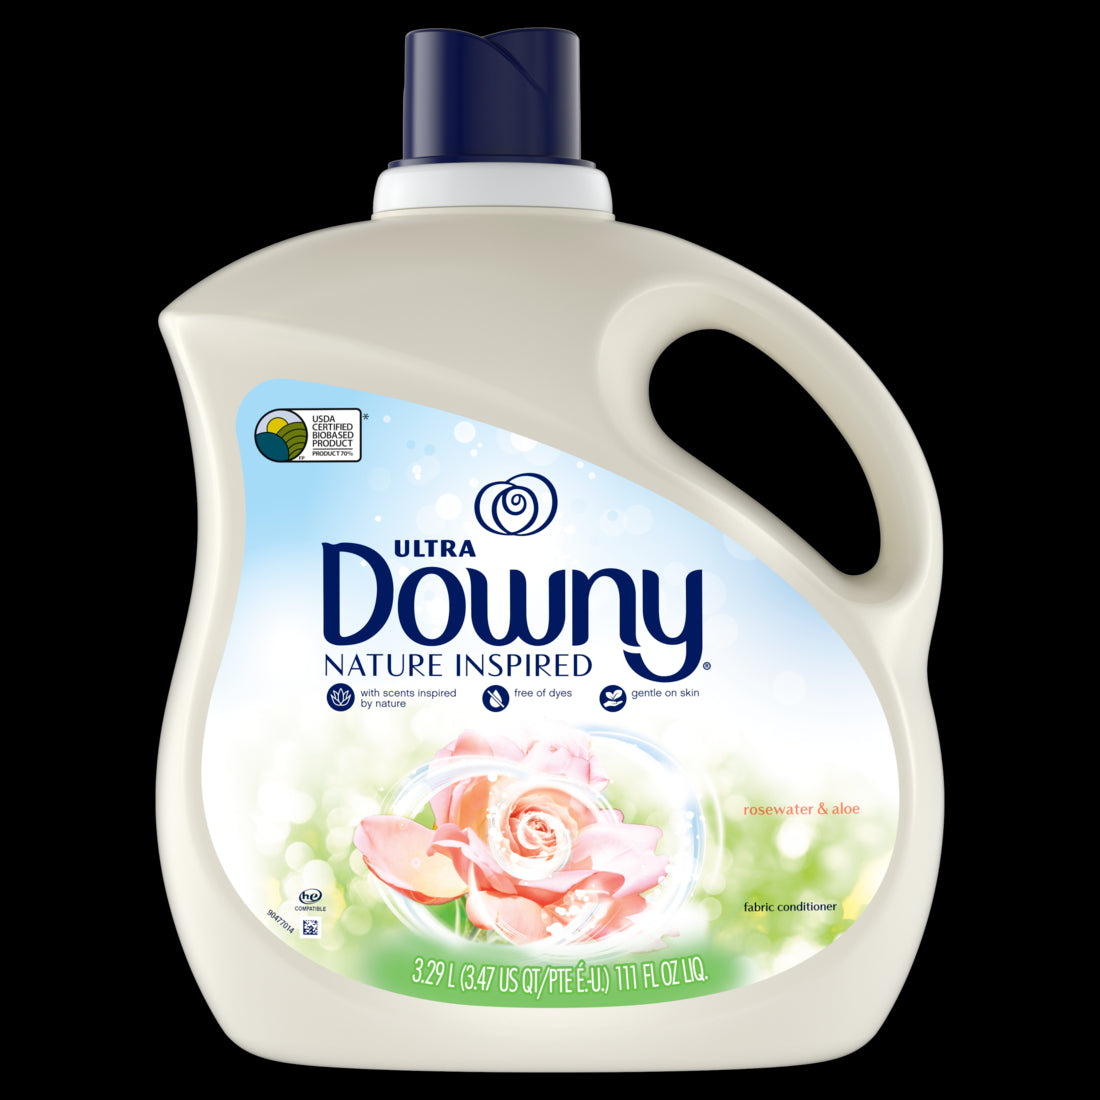 Downy Nature Blends Rosewater and Aloe Liquid Fabric Conditioner - 111oz/4pk